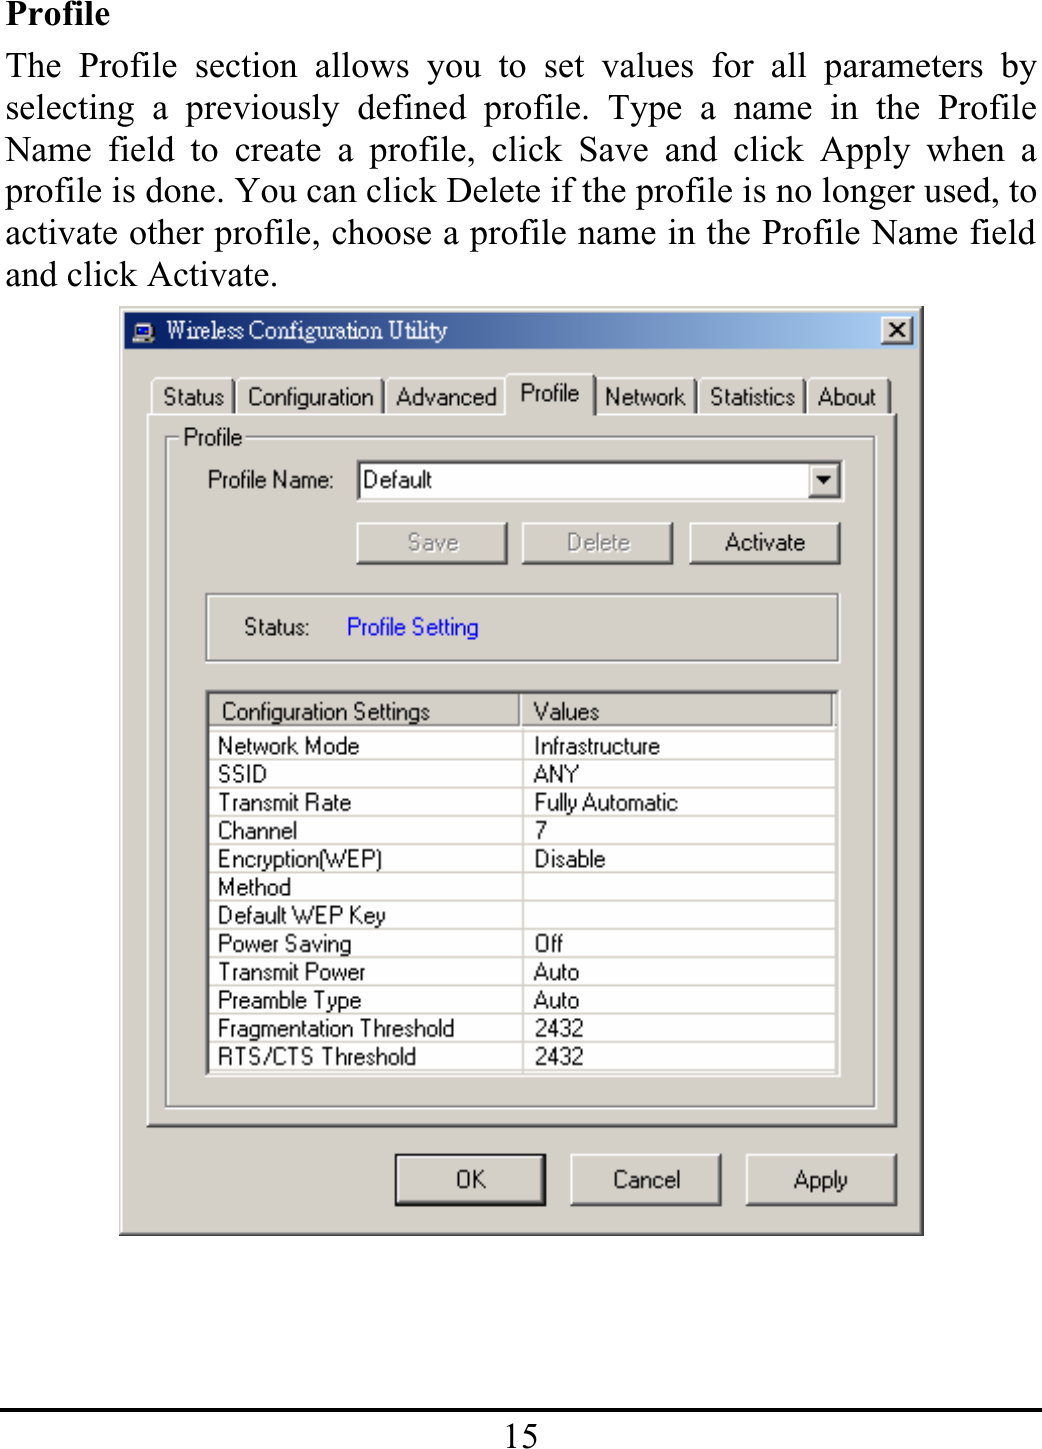 15ProfileThe Profile section allows you to set values for all parameters byselecting a previously defined profile. Type a name in the ProfileName field to create a profile, click Save and click Apply when aprofile is done. You can click Delete if the profile is no longer used, to activate other profile, choose a profile name in the Profile Name field and click Activate.